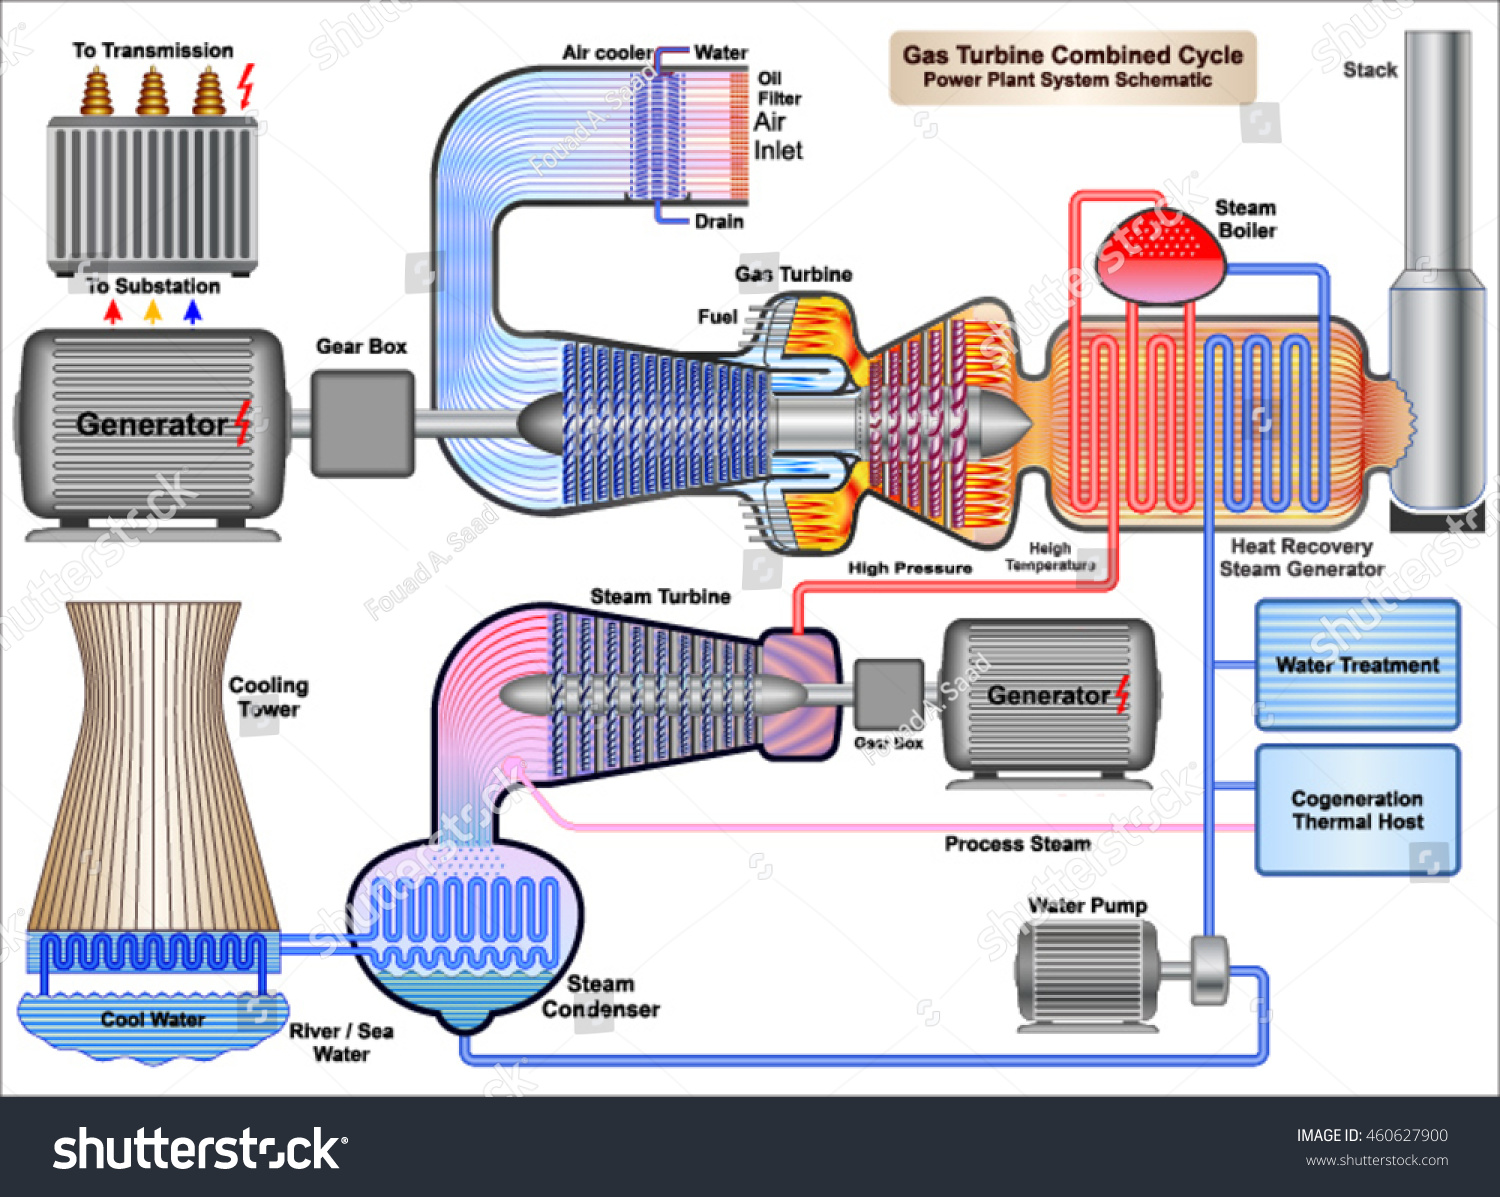 Combined cycle heat recovery steam generator фото 19